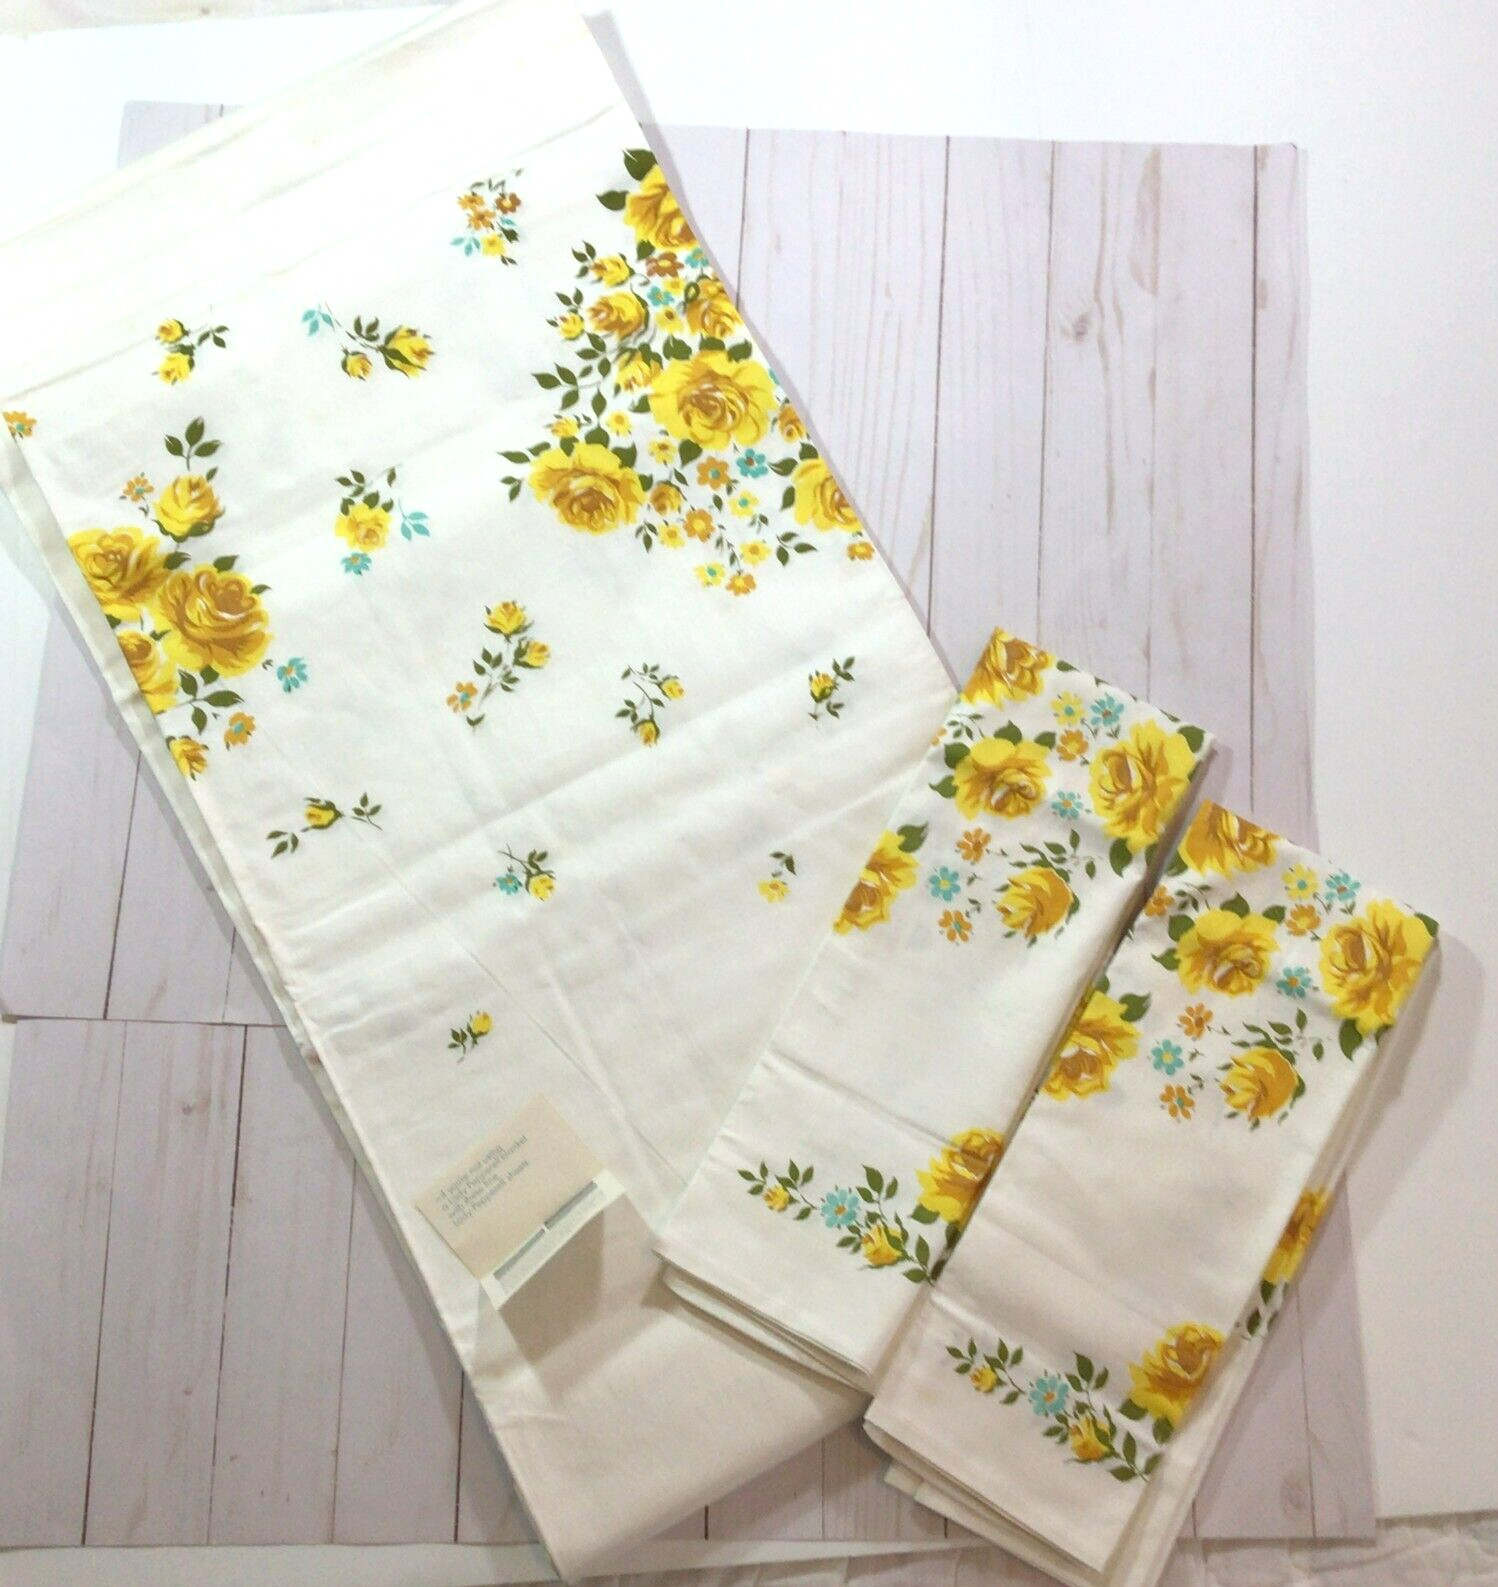 Lady Pepperell Vtg Yellow Floral Top Sheet & Pillow Cases NWOT